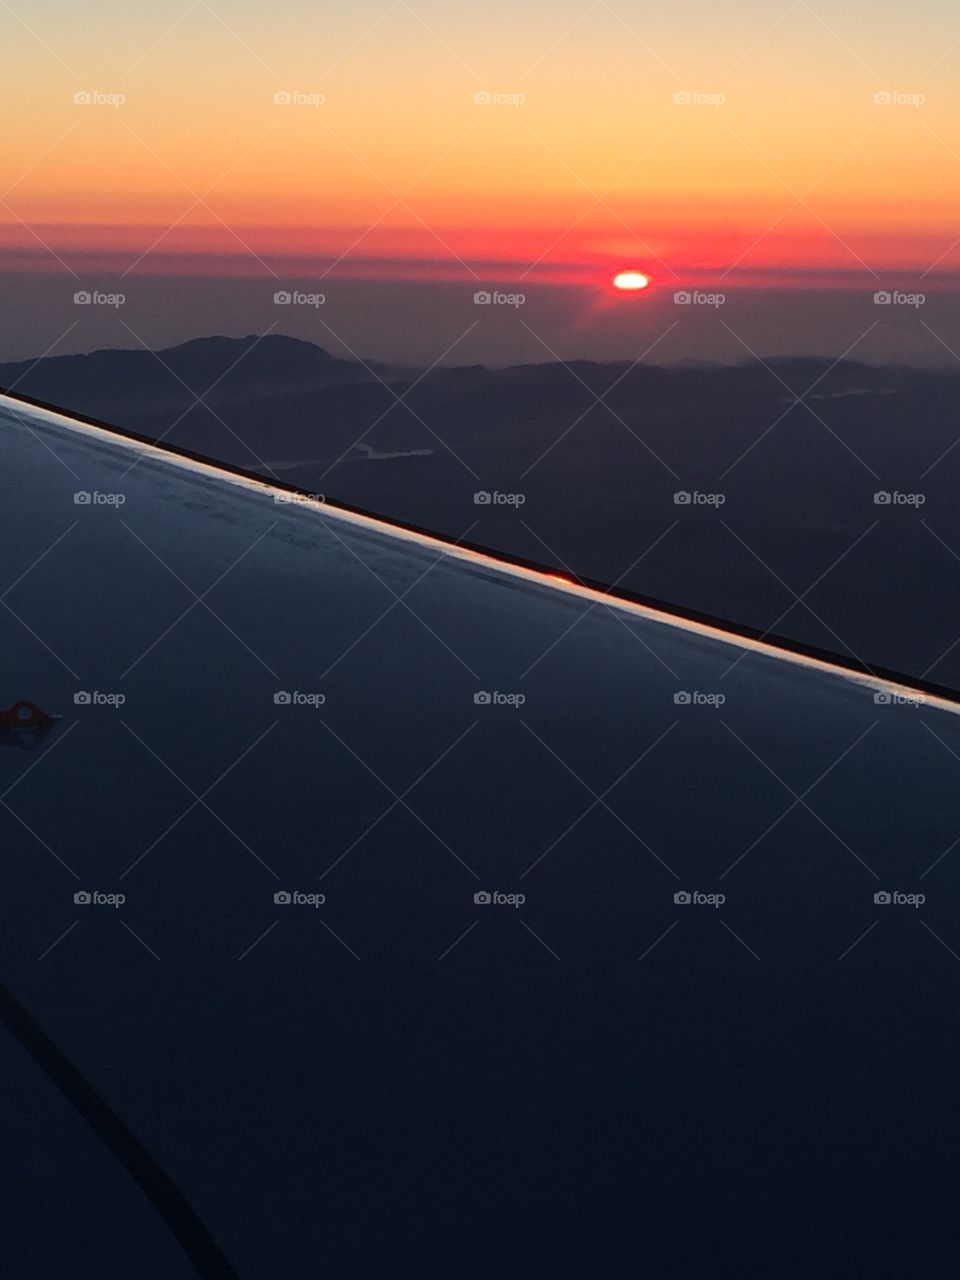 Pacific sunset from a plane